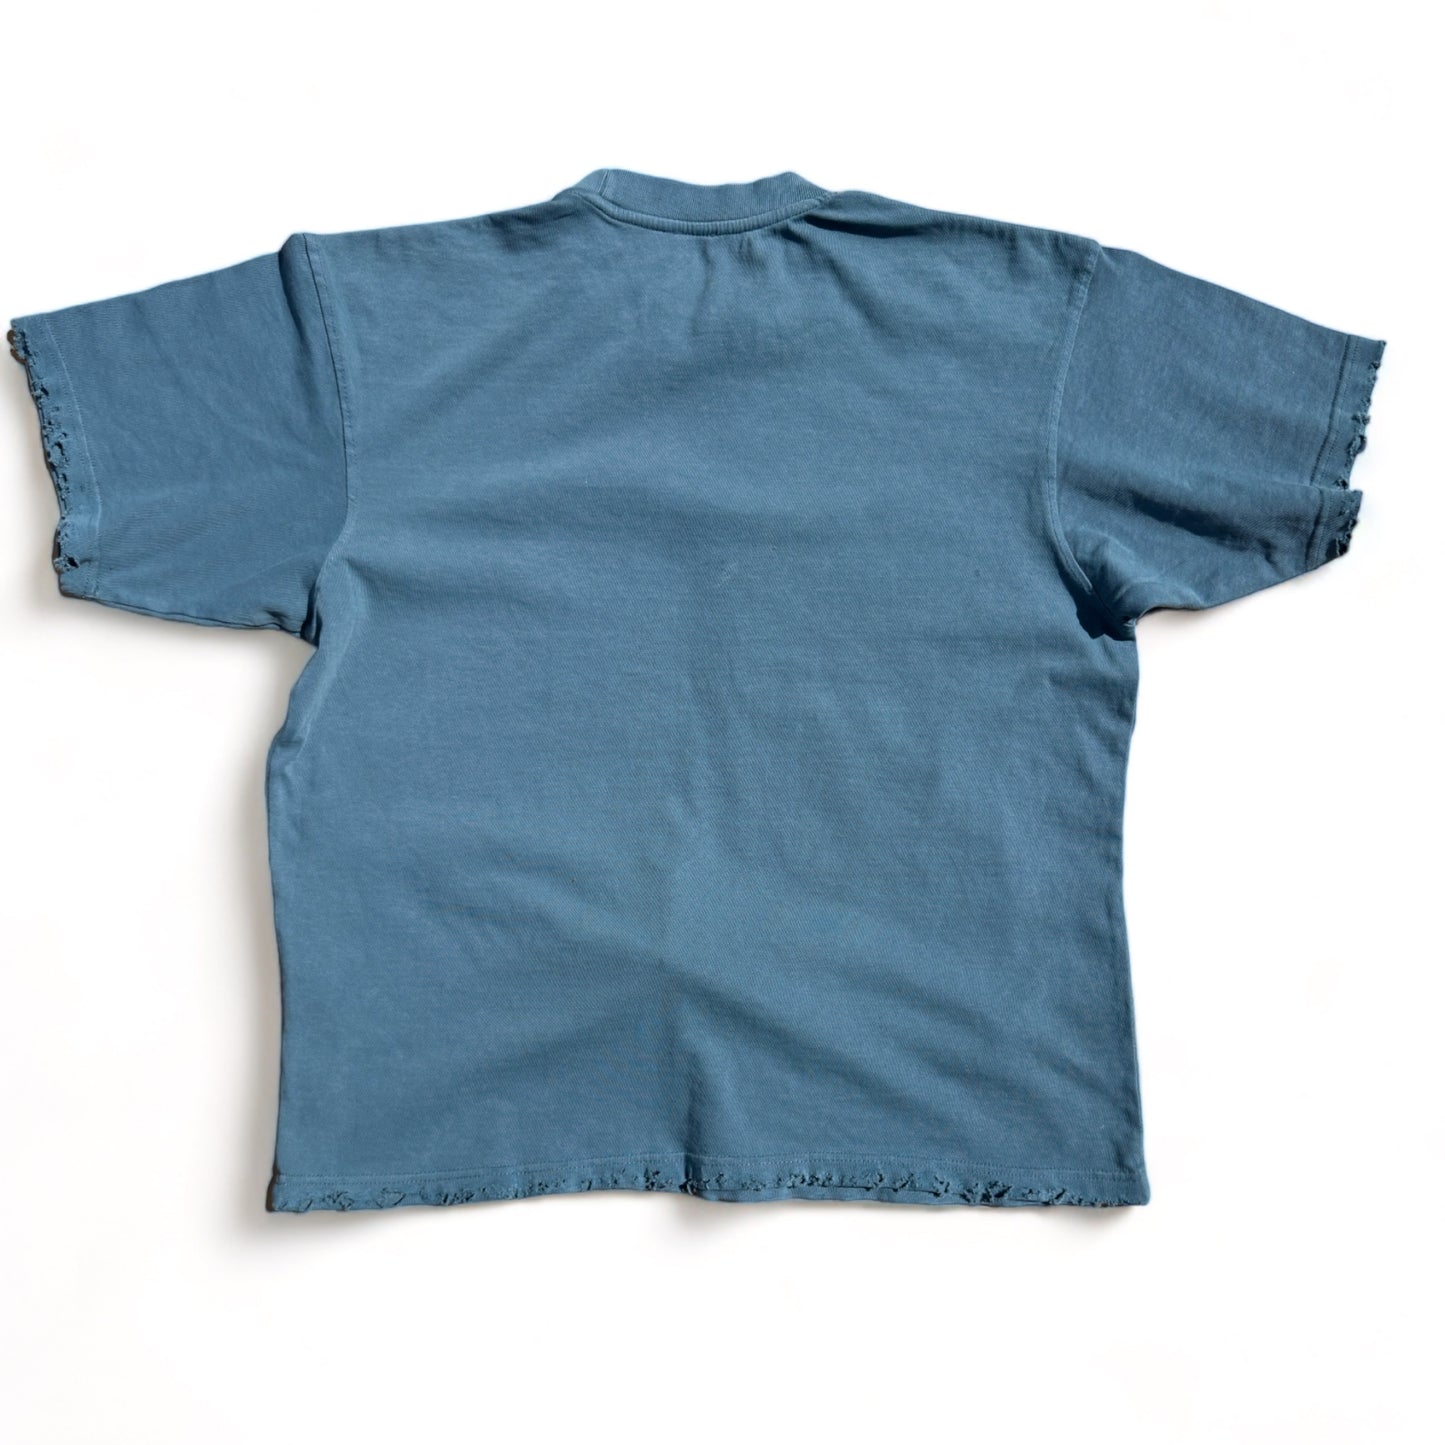 EXPENSIVE PARADISE - "RAW LUXURY" (HEAVYWEIGHT PIGMENT TEE) COLOR: PEBBLE BLUE